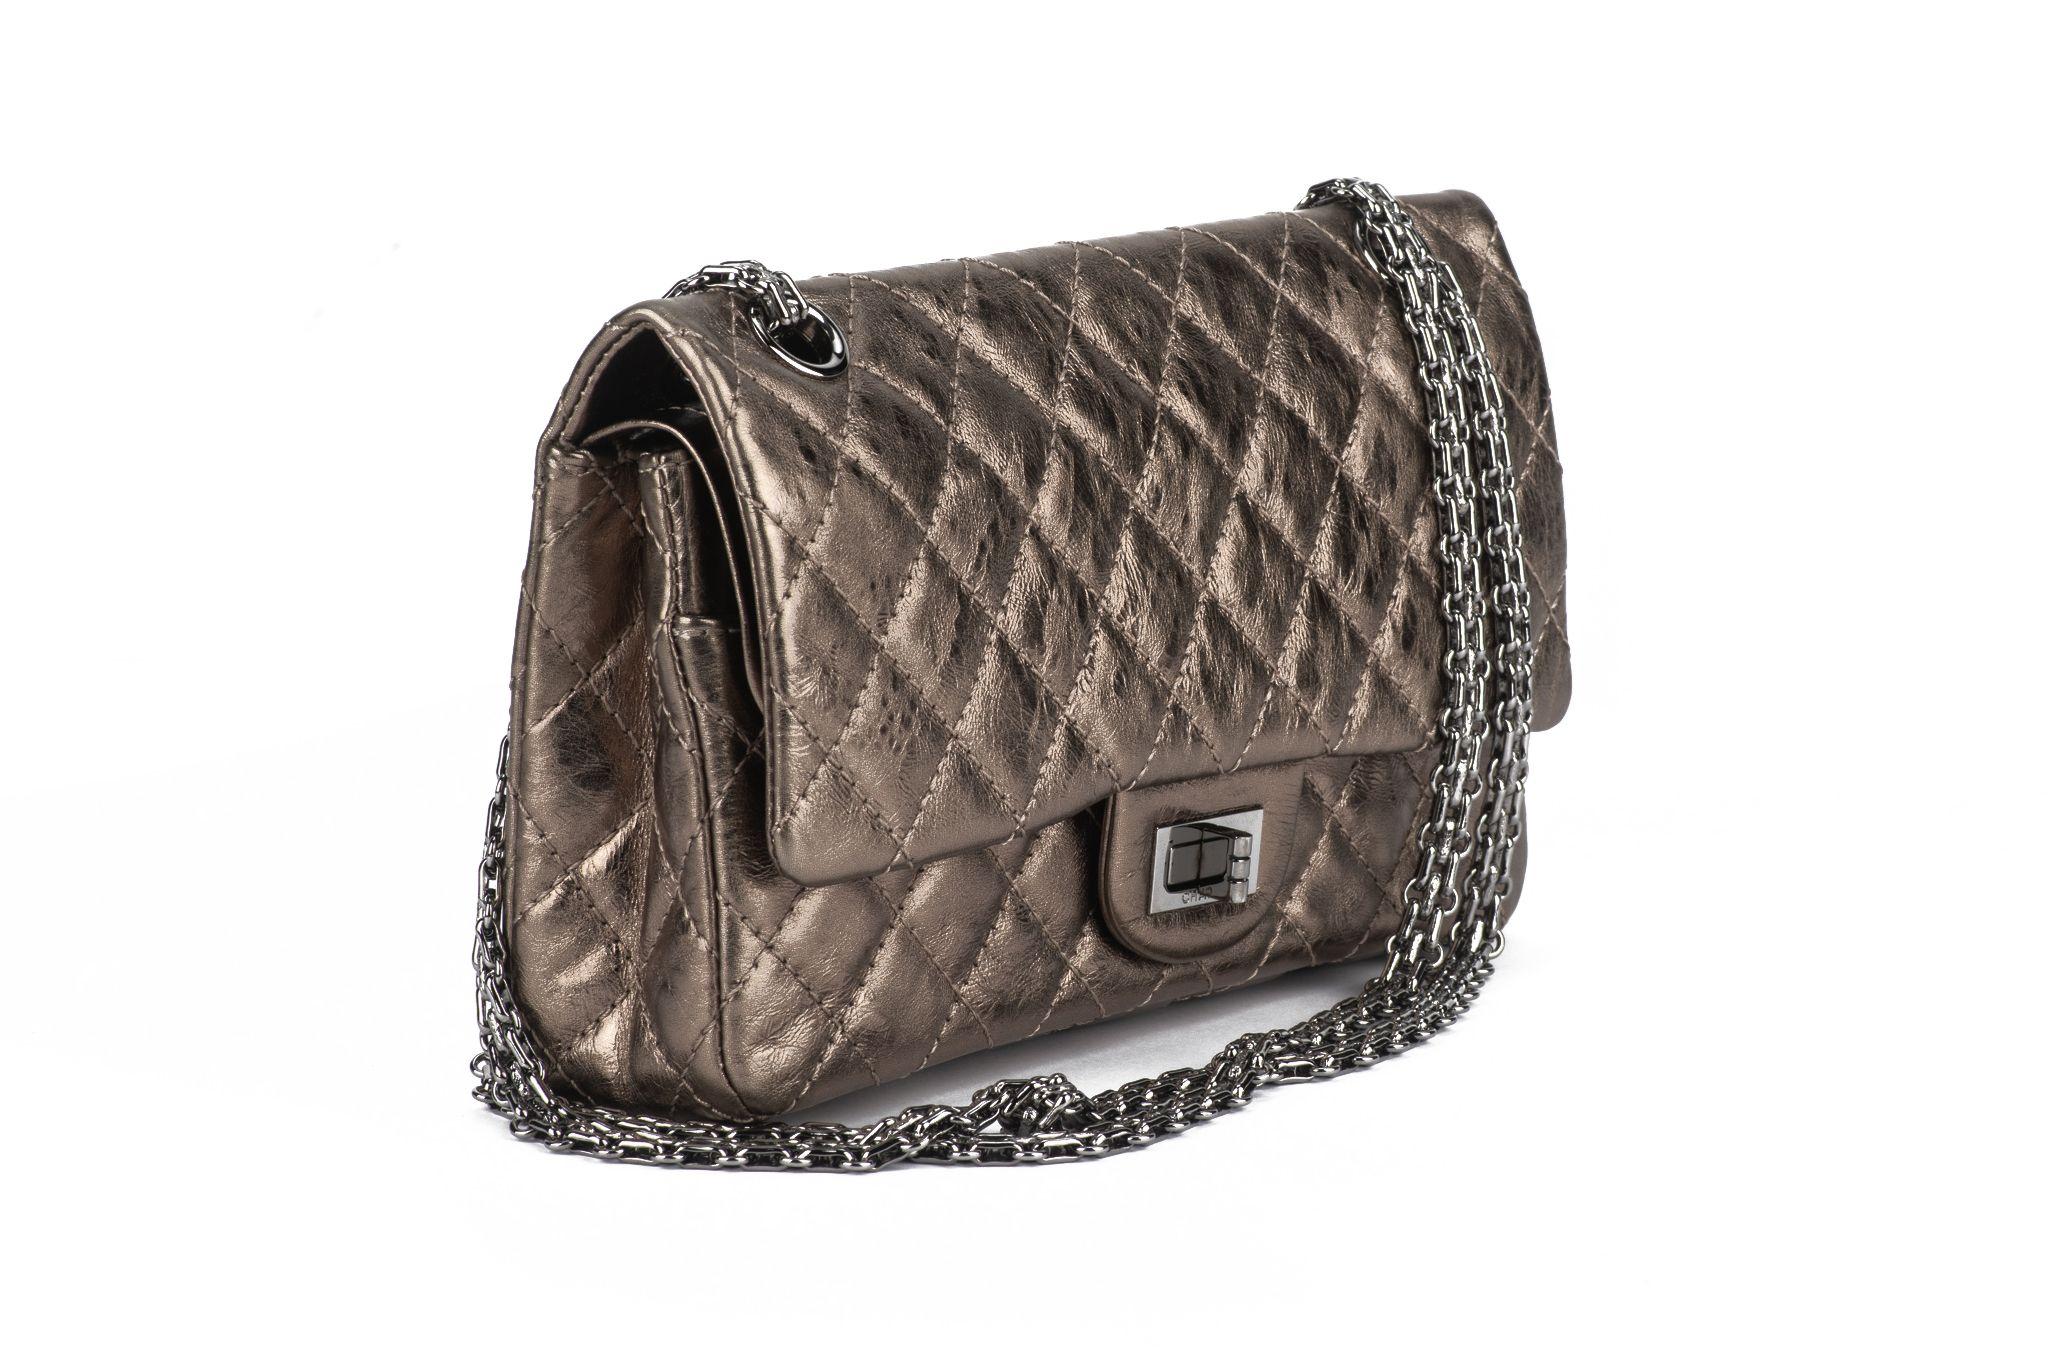 The Chanel Metallic Aged Calfskin Quilted 2.55 Reissue Flap Bag. This is a chic classic reissue is crafted of quilted calfskin leather in gold. The shoulder bag has ruthenium tightly linked shoulder chains and a ruthenium Chanel mademoiselle turn